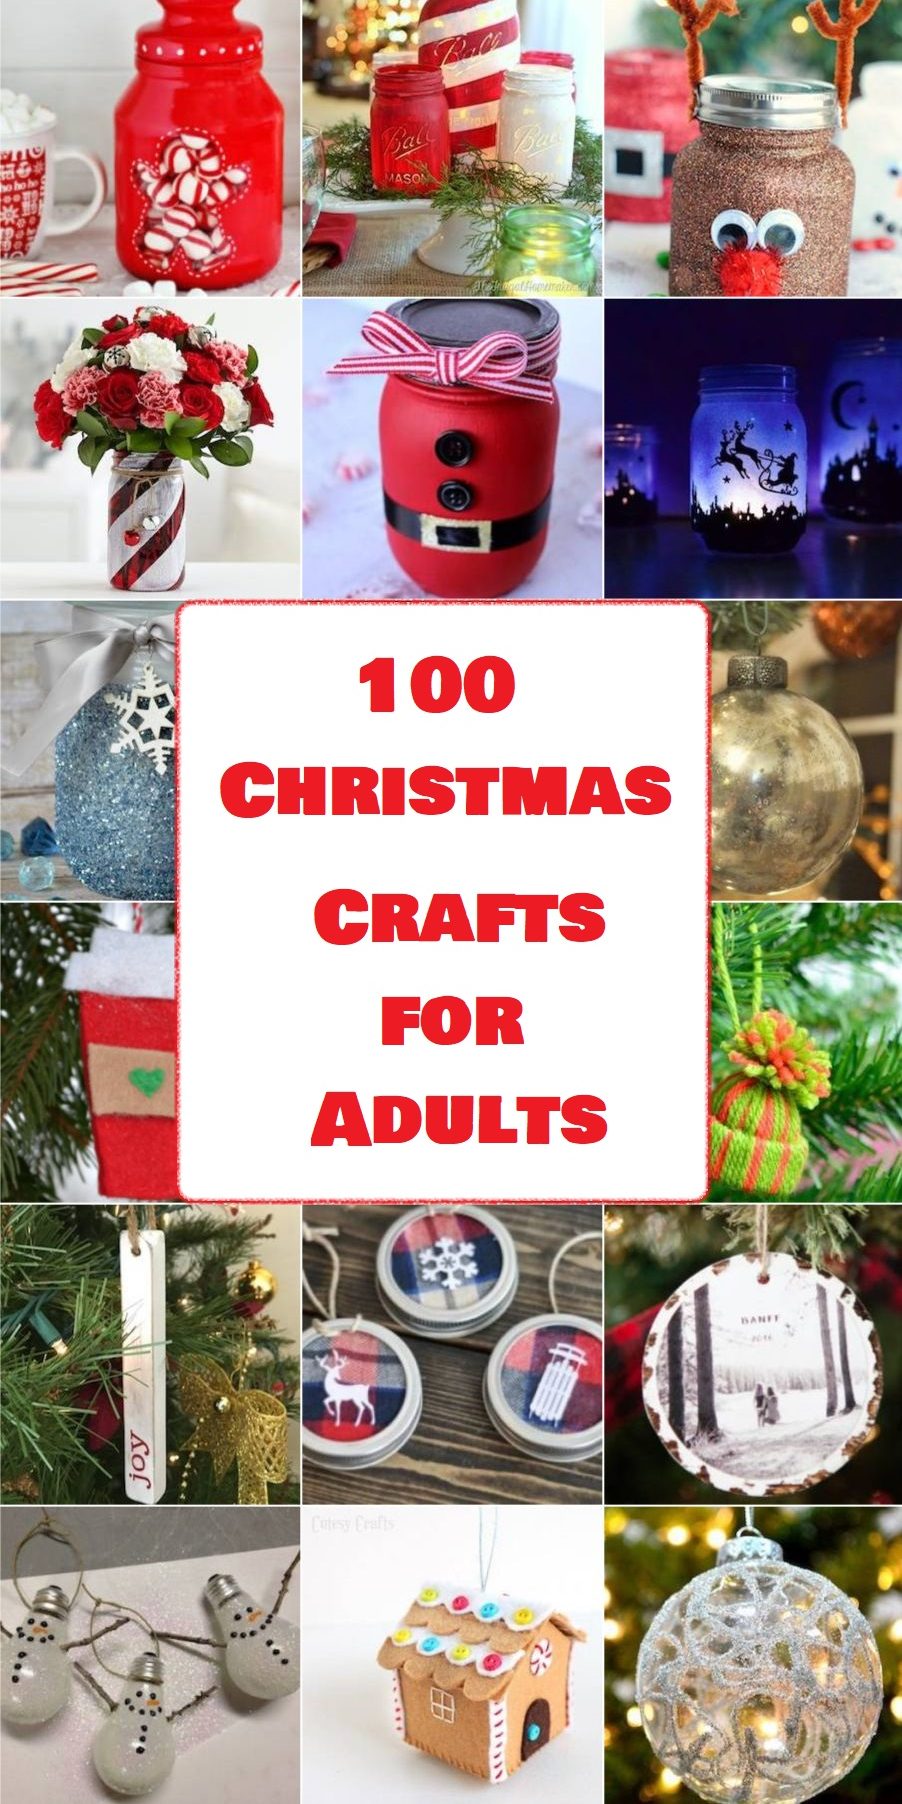 100 Christmas Crafts for Adults | TOPppINFO.com